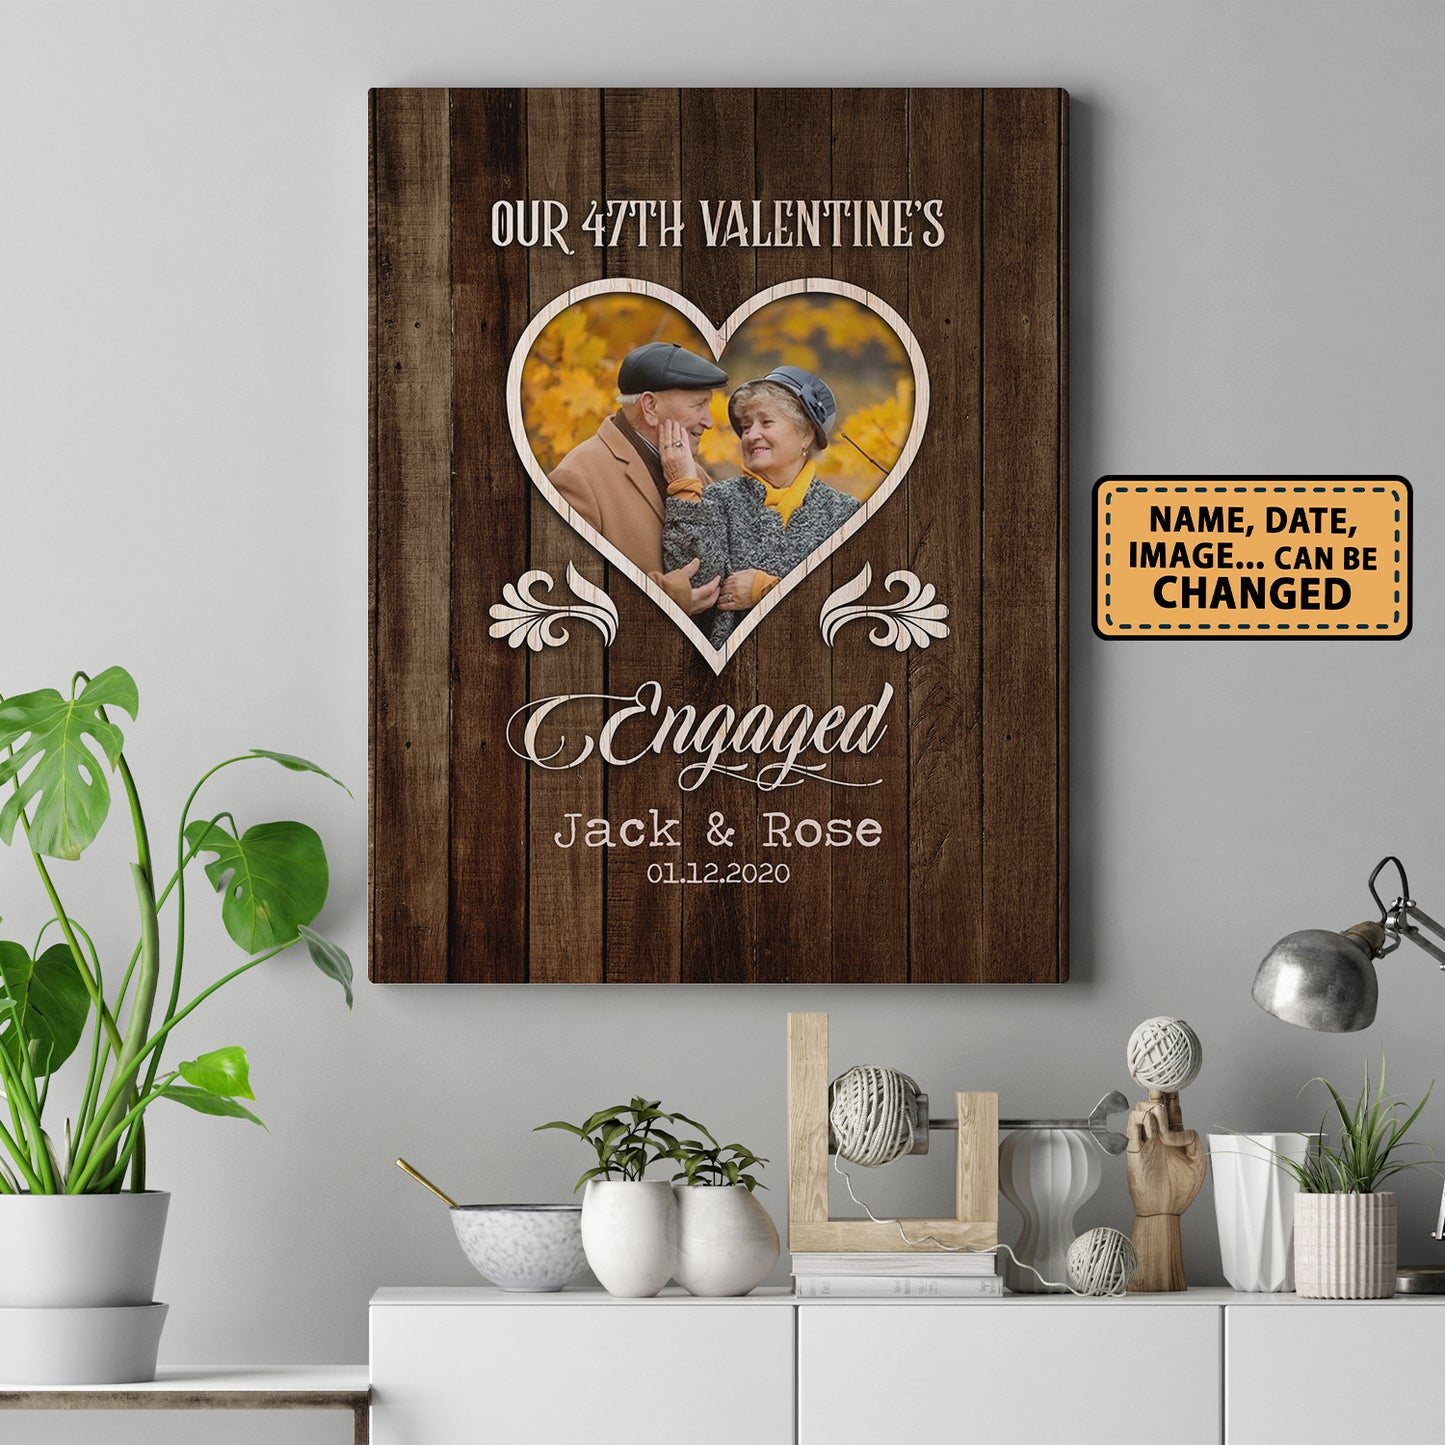 Our 47th Valentine’s Day Engaged Custom Image Anniversary Canvas